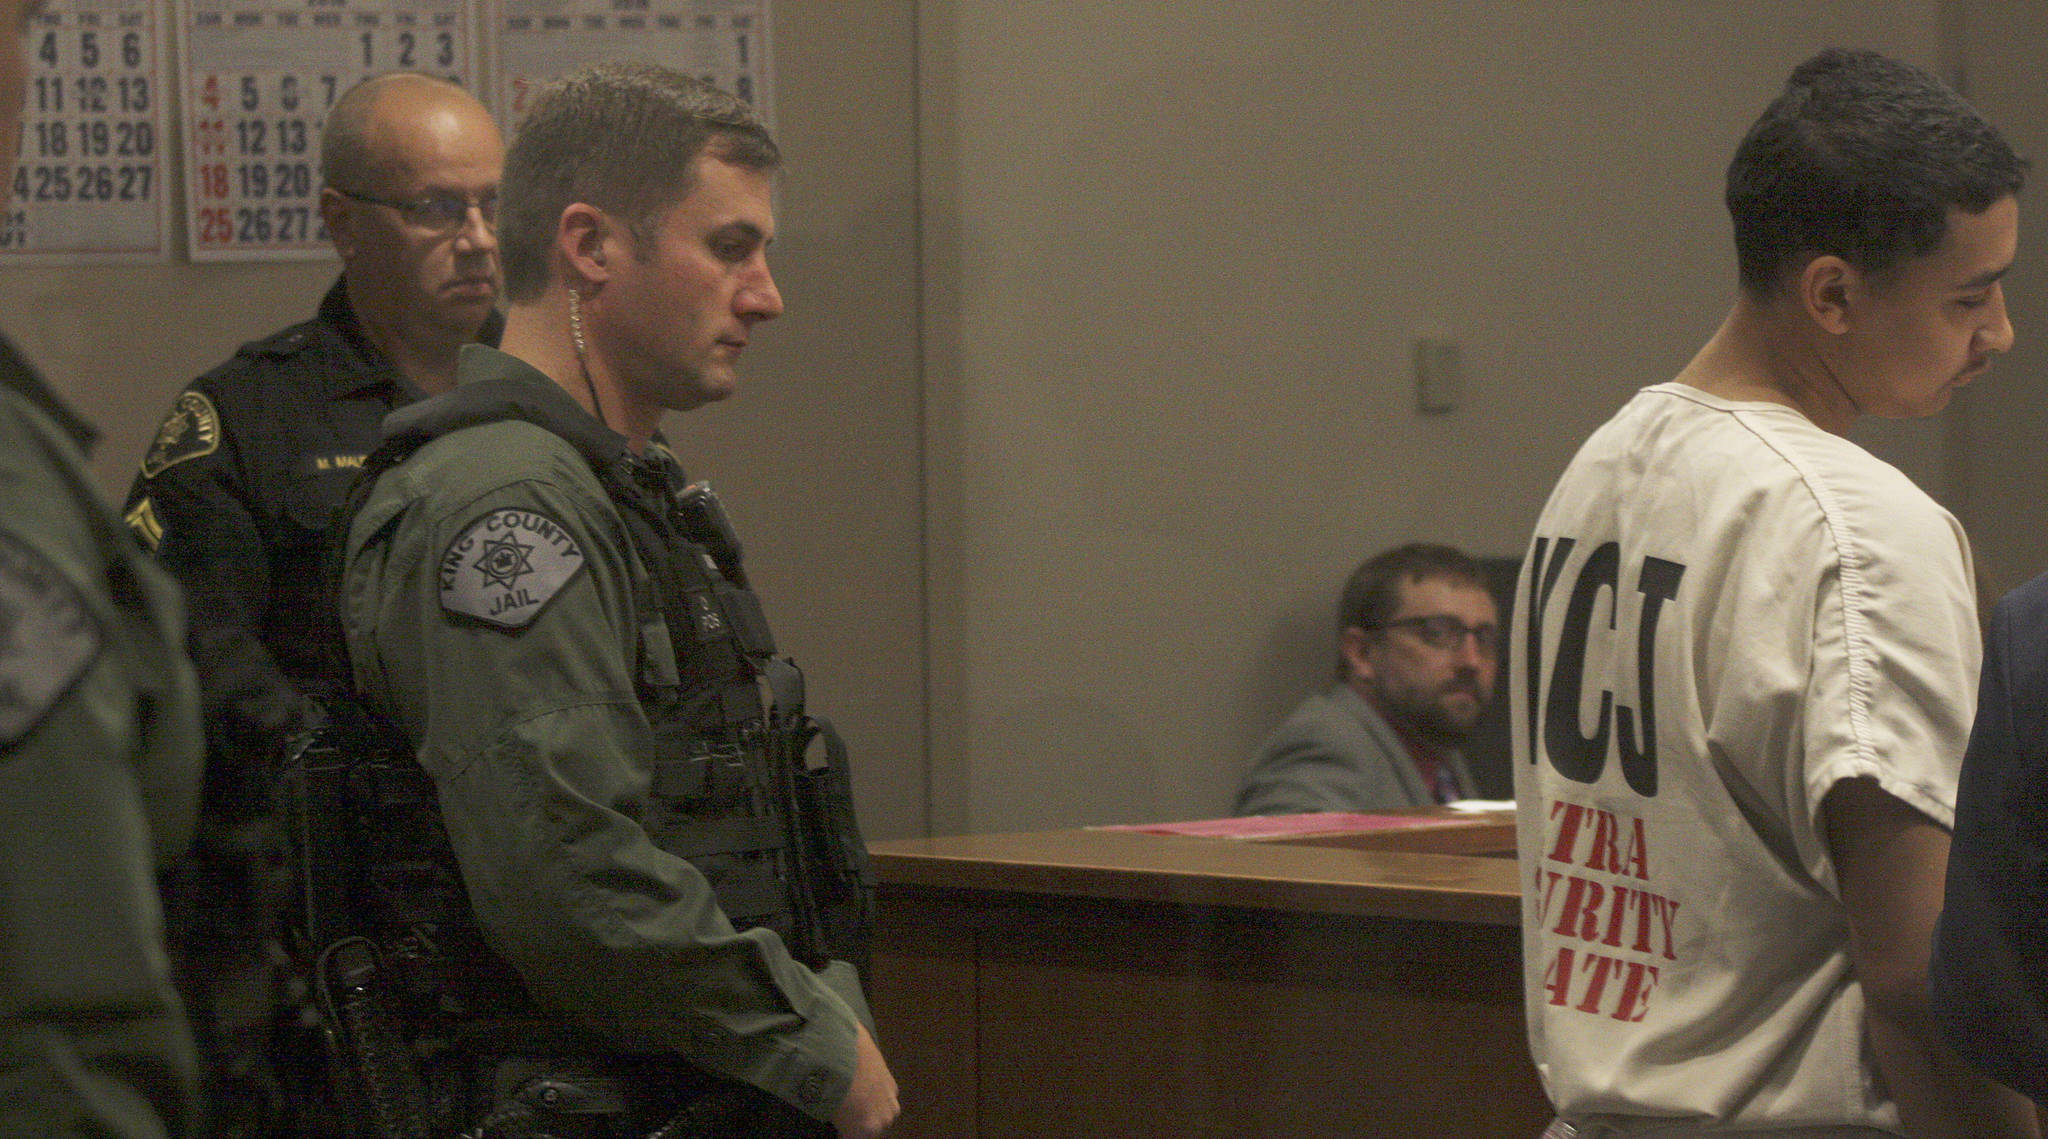 Accompanied by extra King County jail guards, Giovanni D. Herrin appears for his arraignment in King County Superior Court on murder and escape charges. MARK KLAAS, Kent Reporter